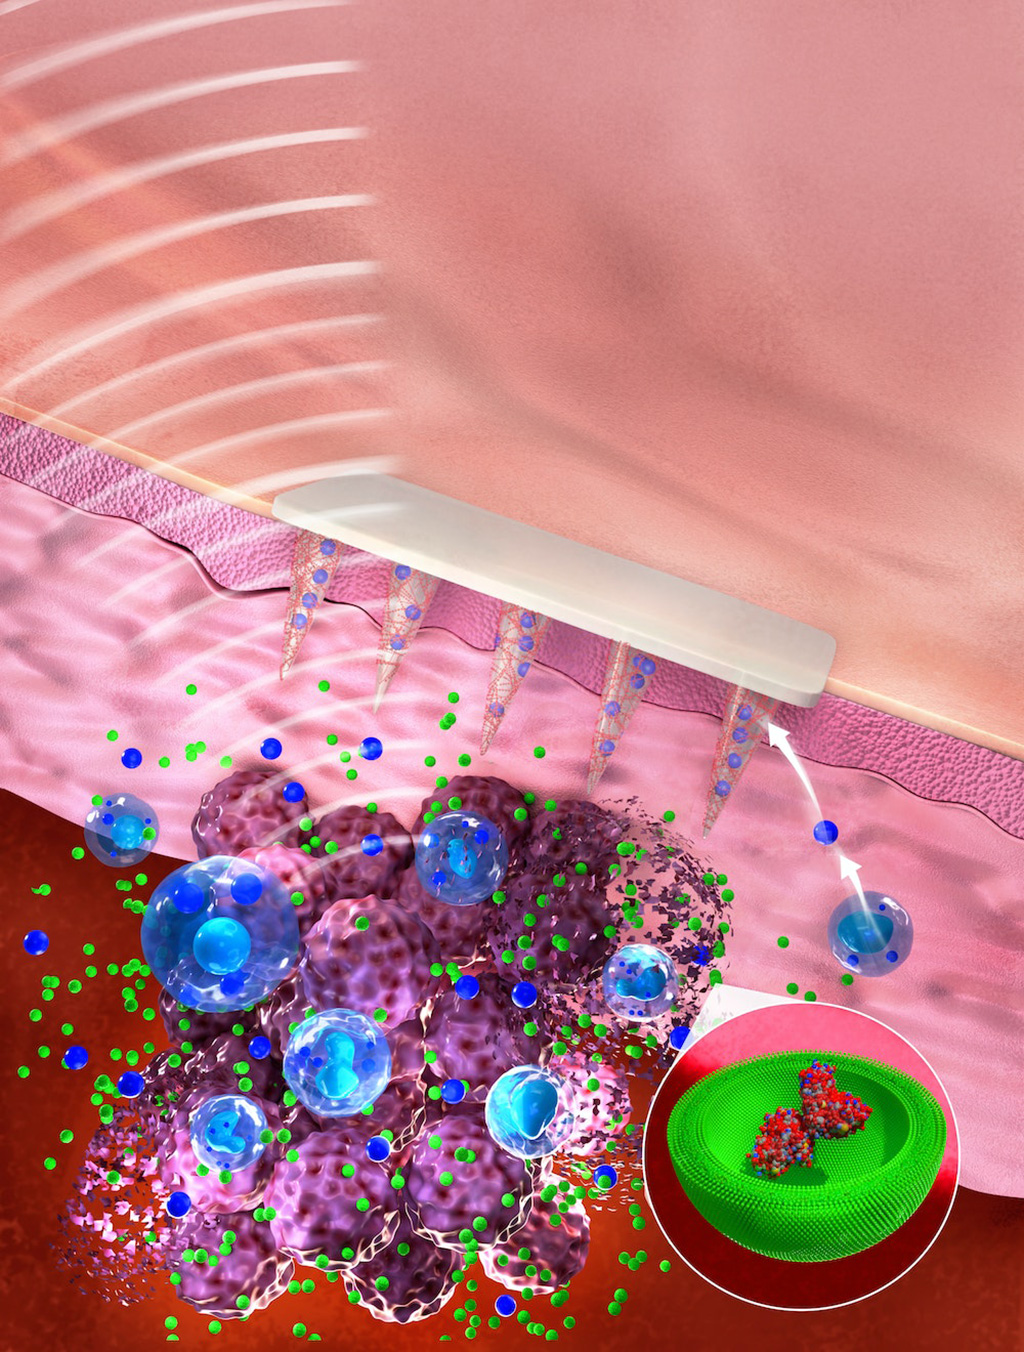 Image: Biomarker molecules can be sampled from melanoma lesions using microneedles (Photo courtesy of Wyss Institute)